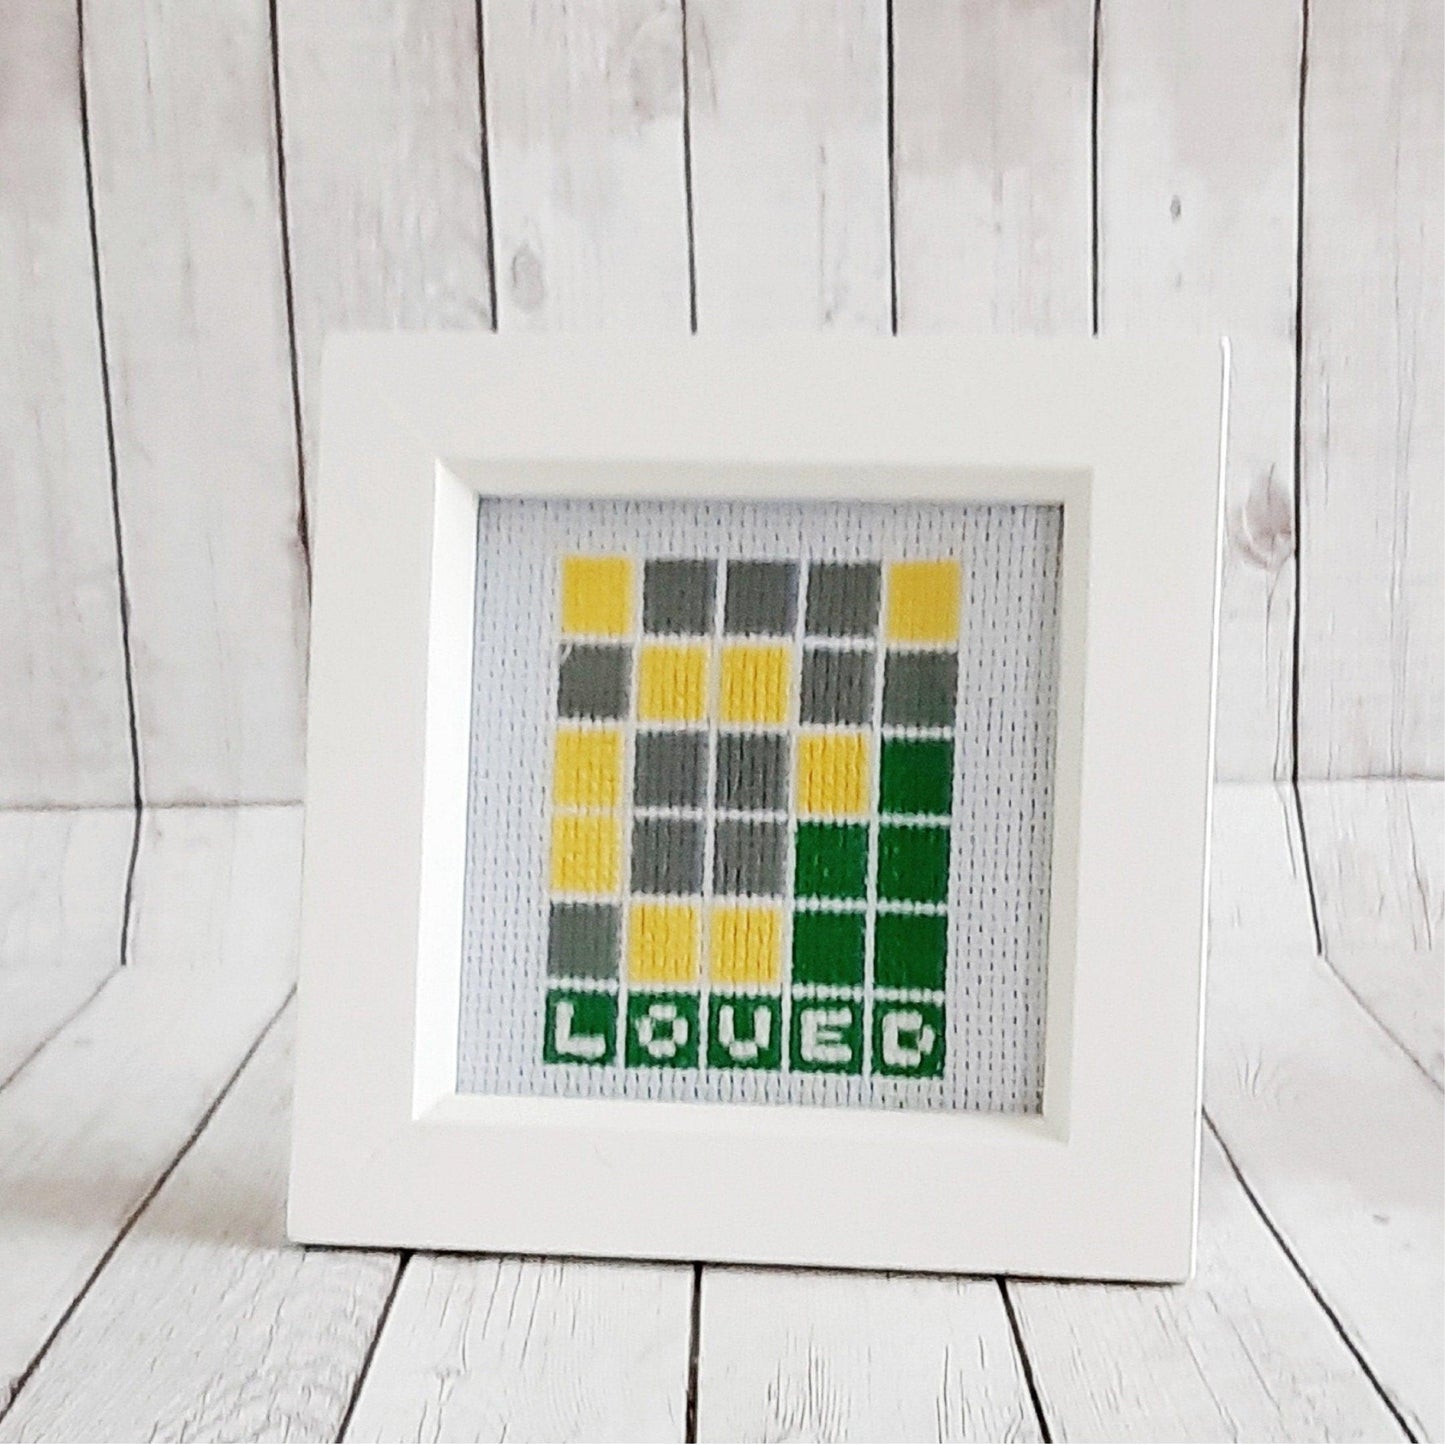 Completed cross stitch showing a wordle game with the solution being the word 'loved'. It is on white fabric, with a white square chunky frame